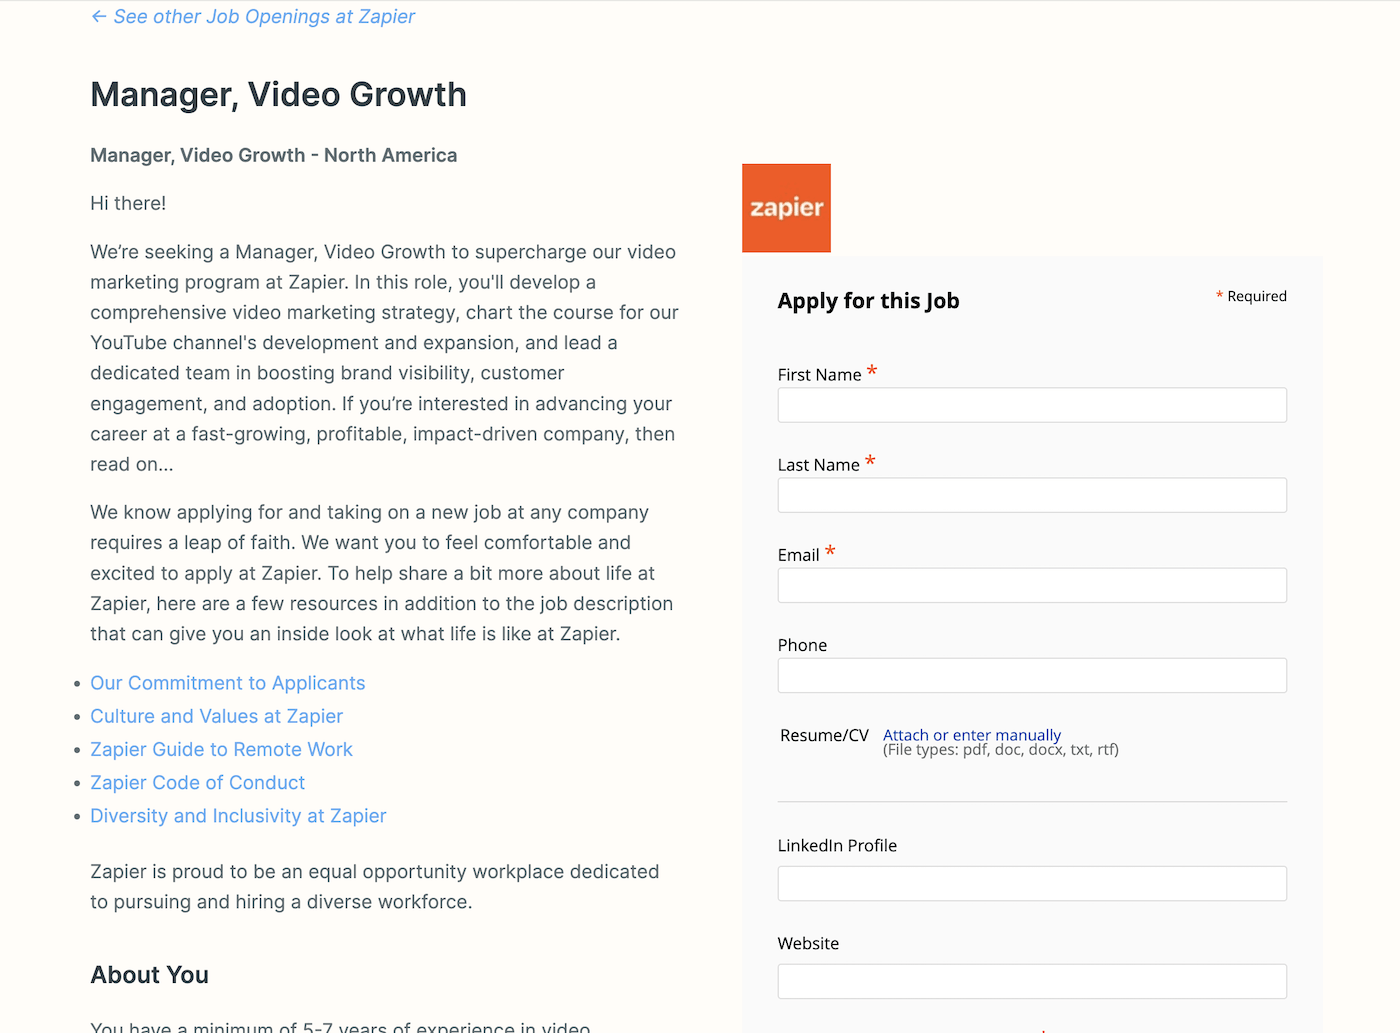 Zapier's job listing for a video manager role includes links to various workplace values pages.